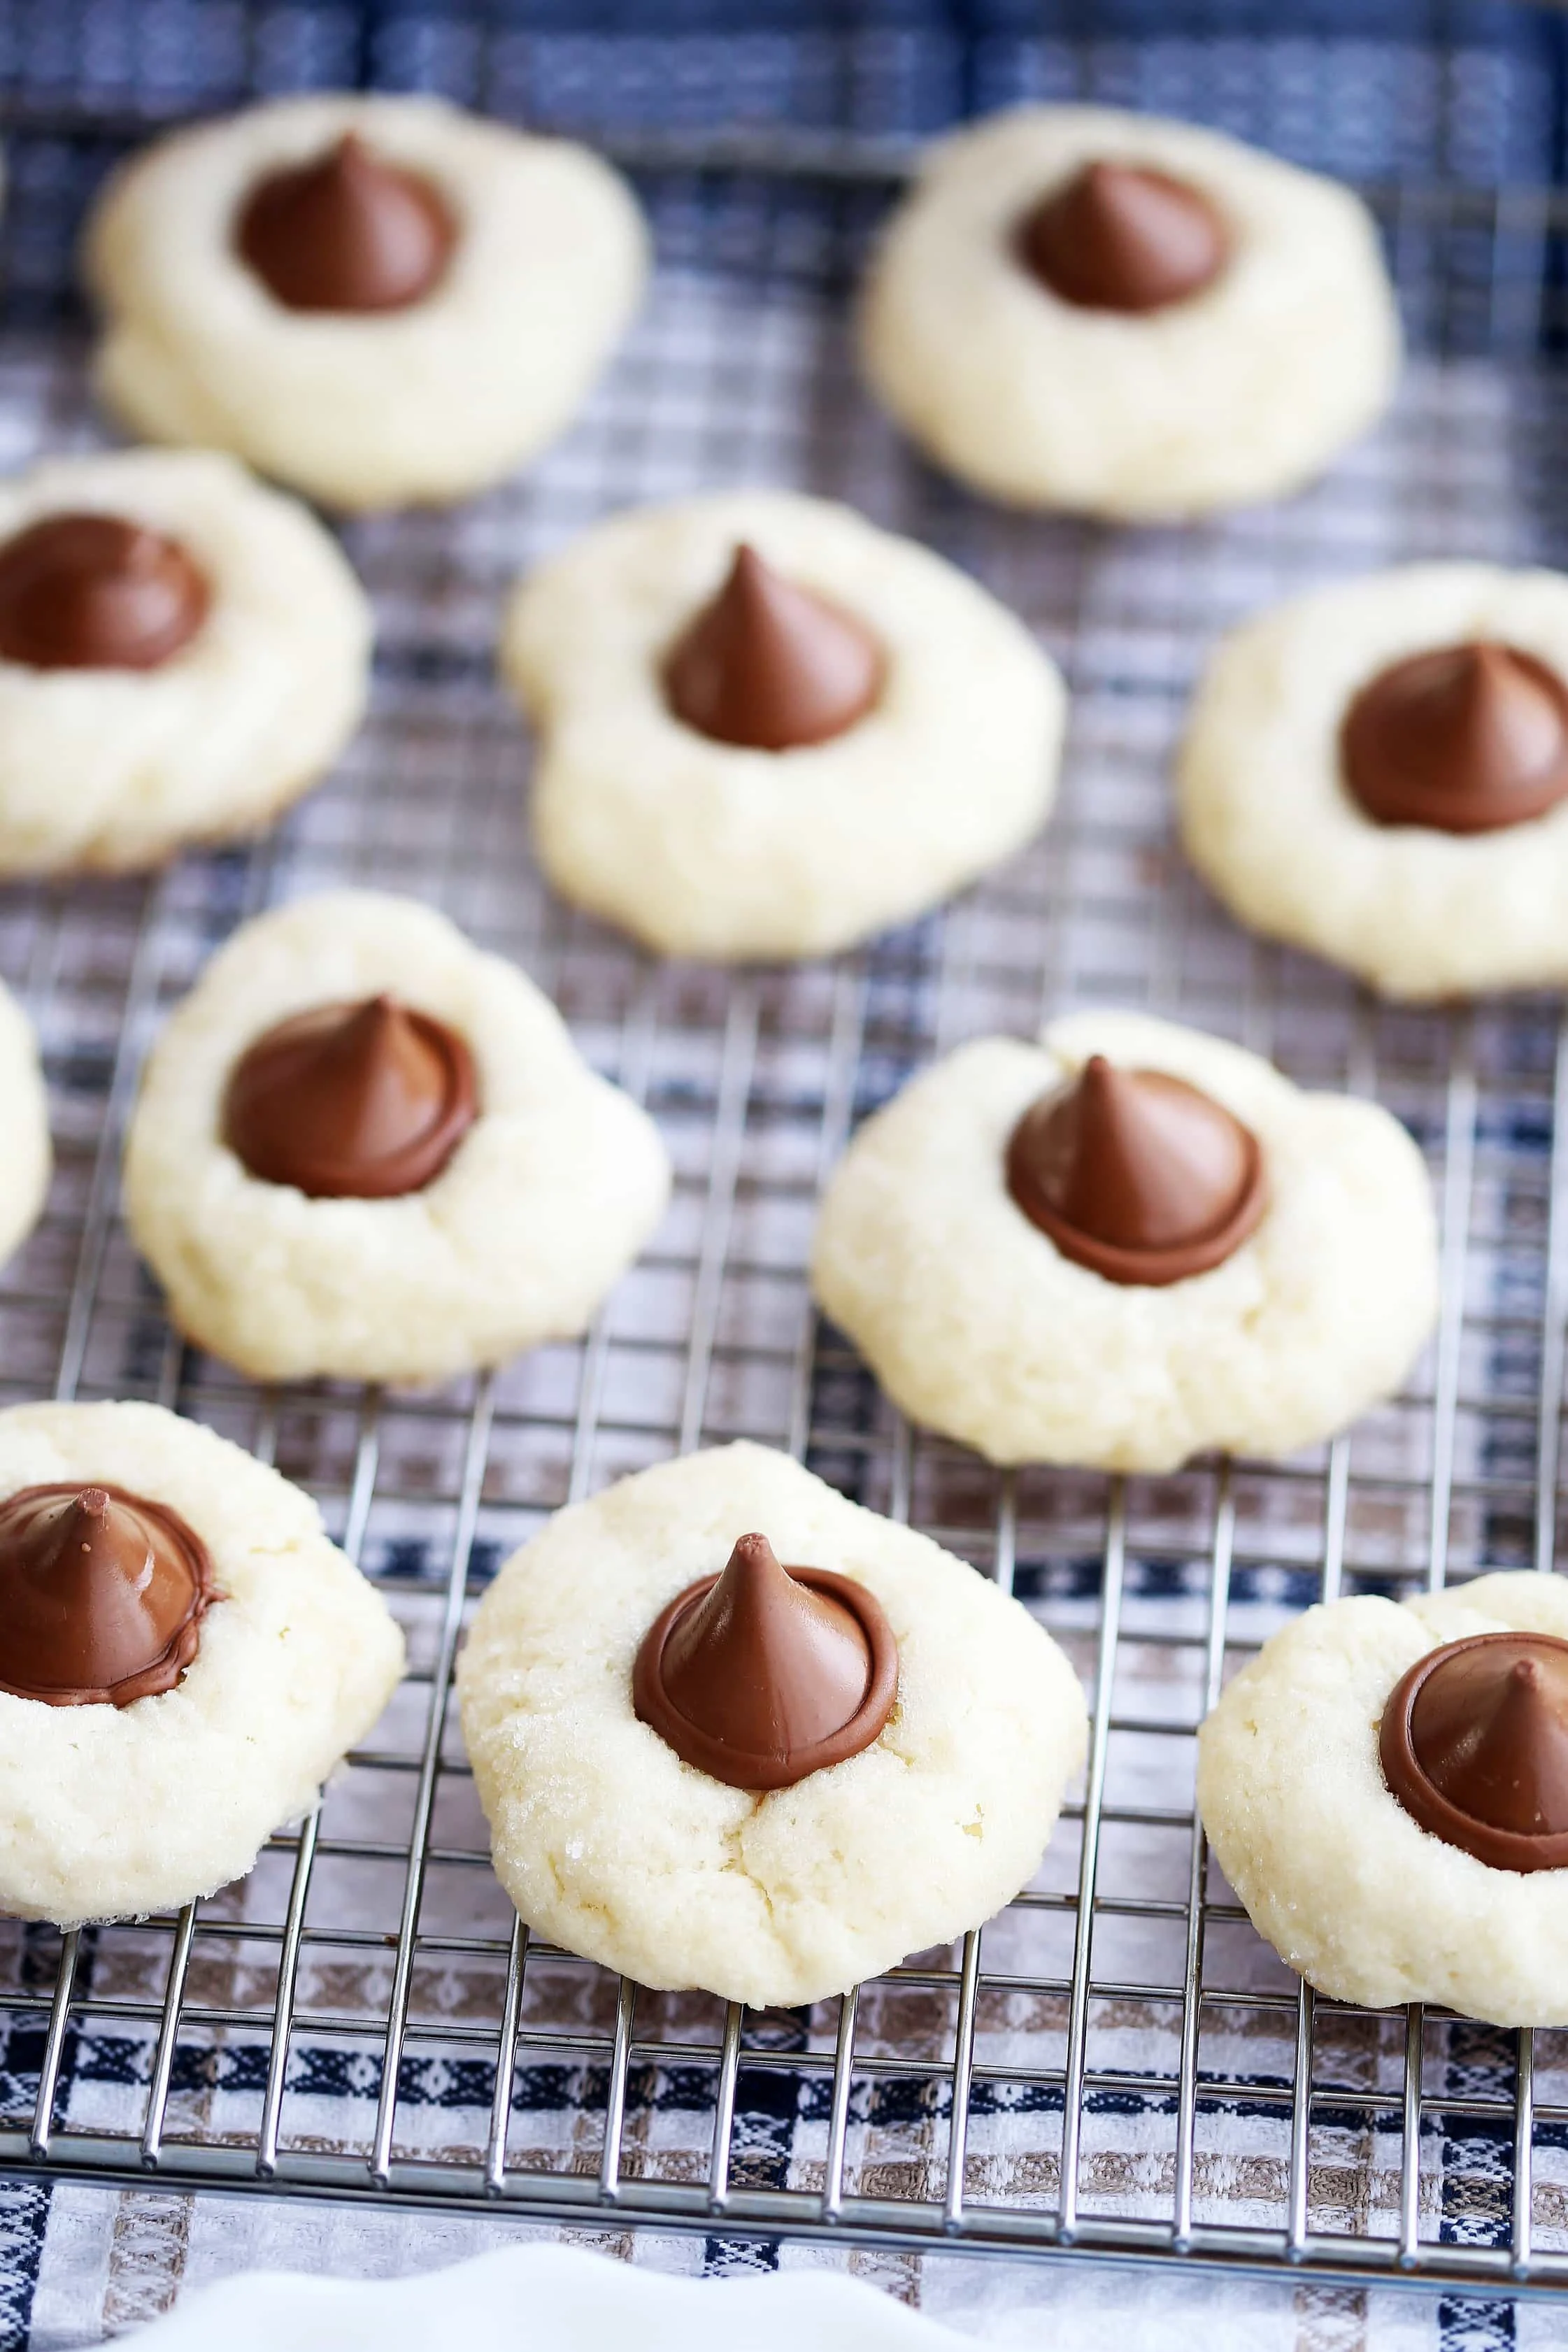 An up-close view of Cream Cheese Kiss Cookies on a metal cooling rack.